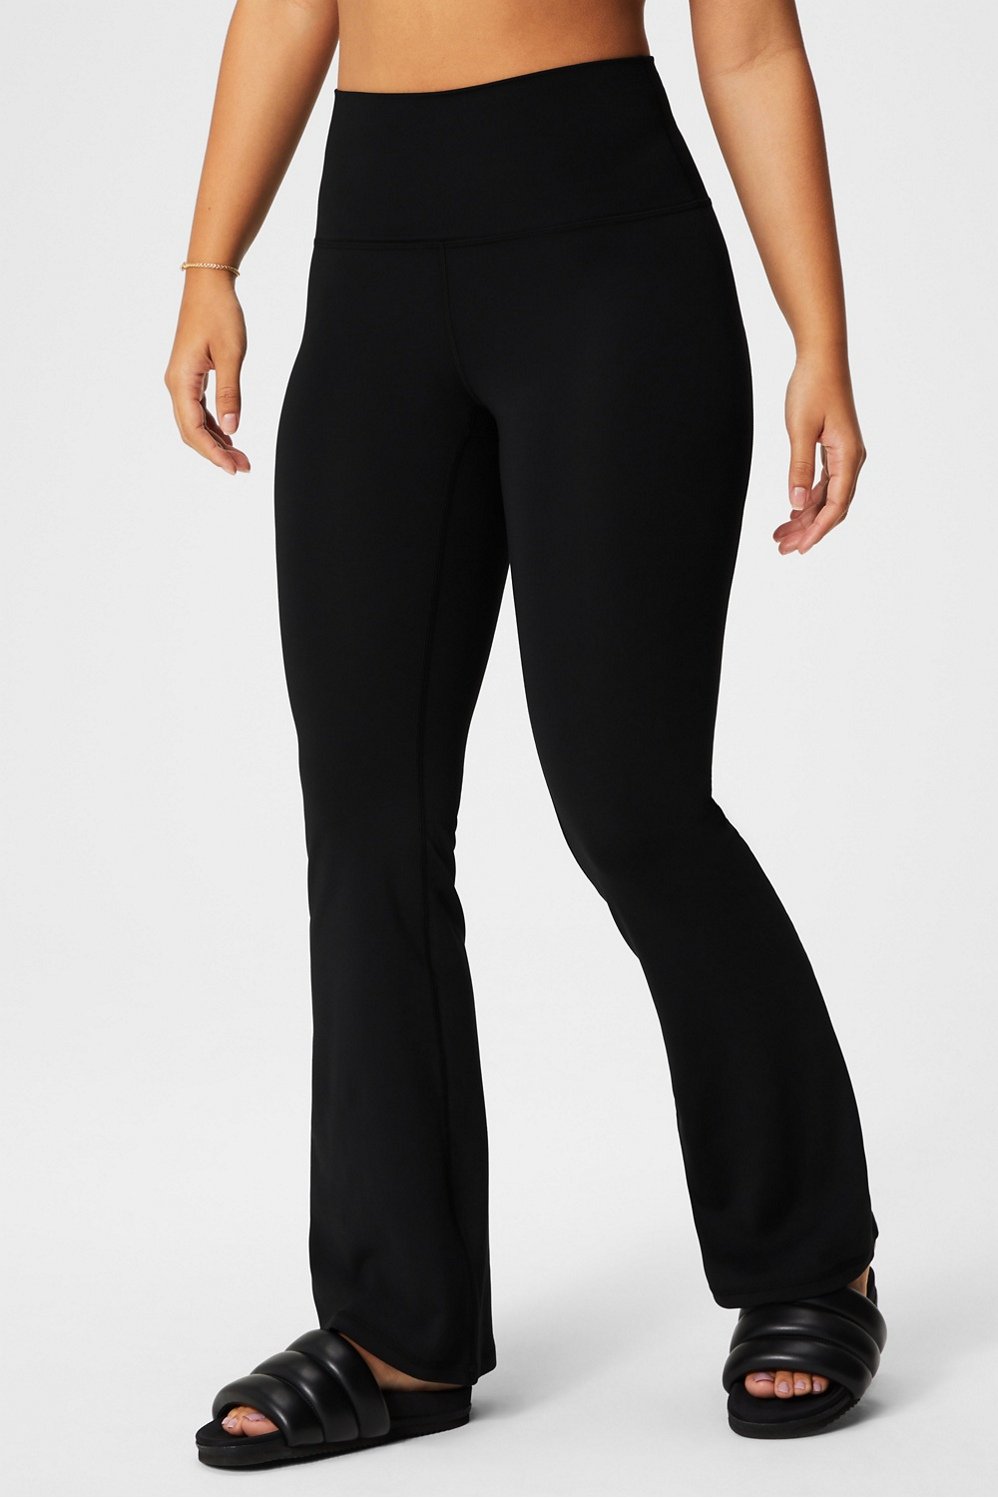 Cotton Black High Waisted Flared Pants